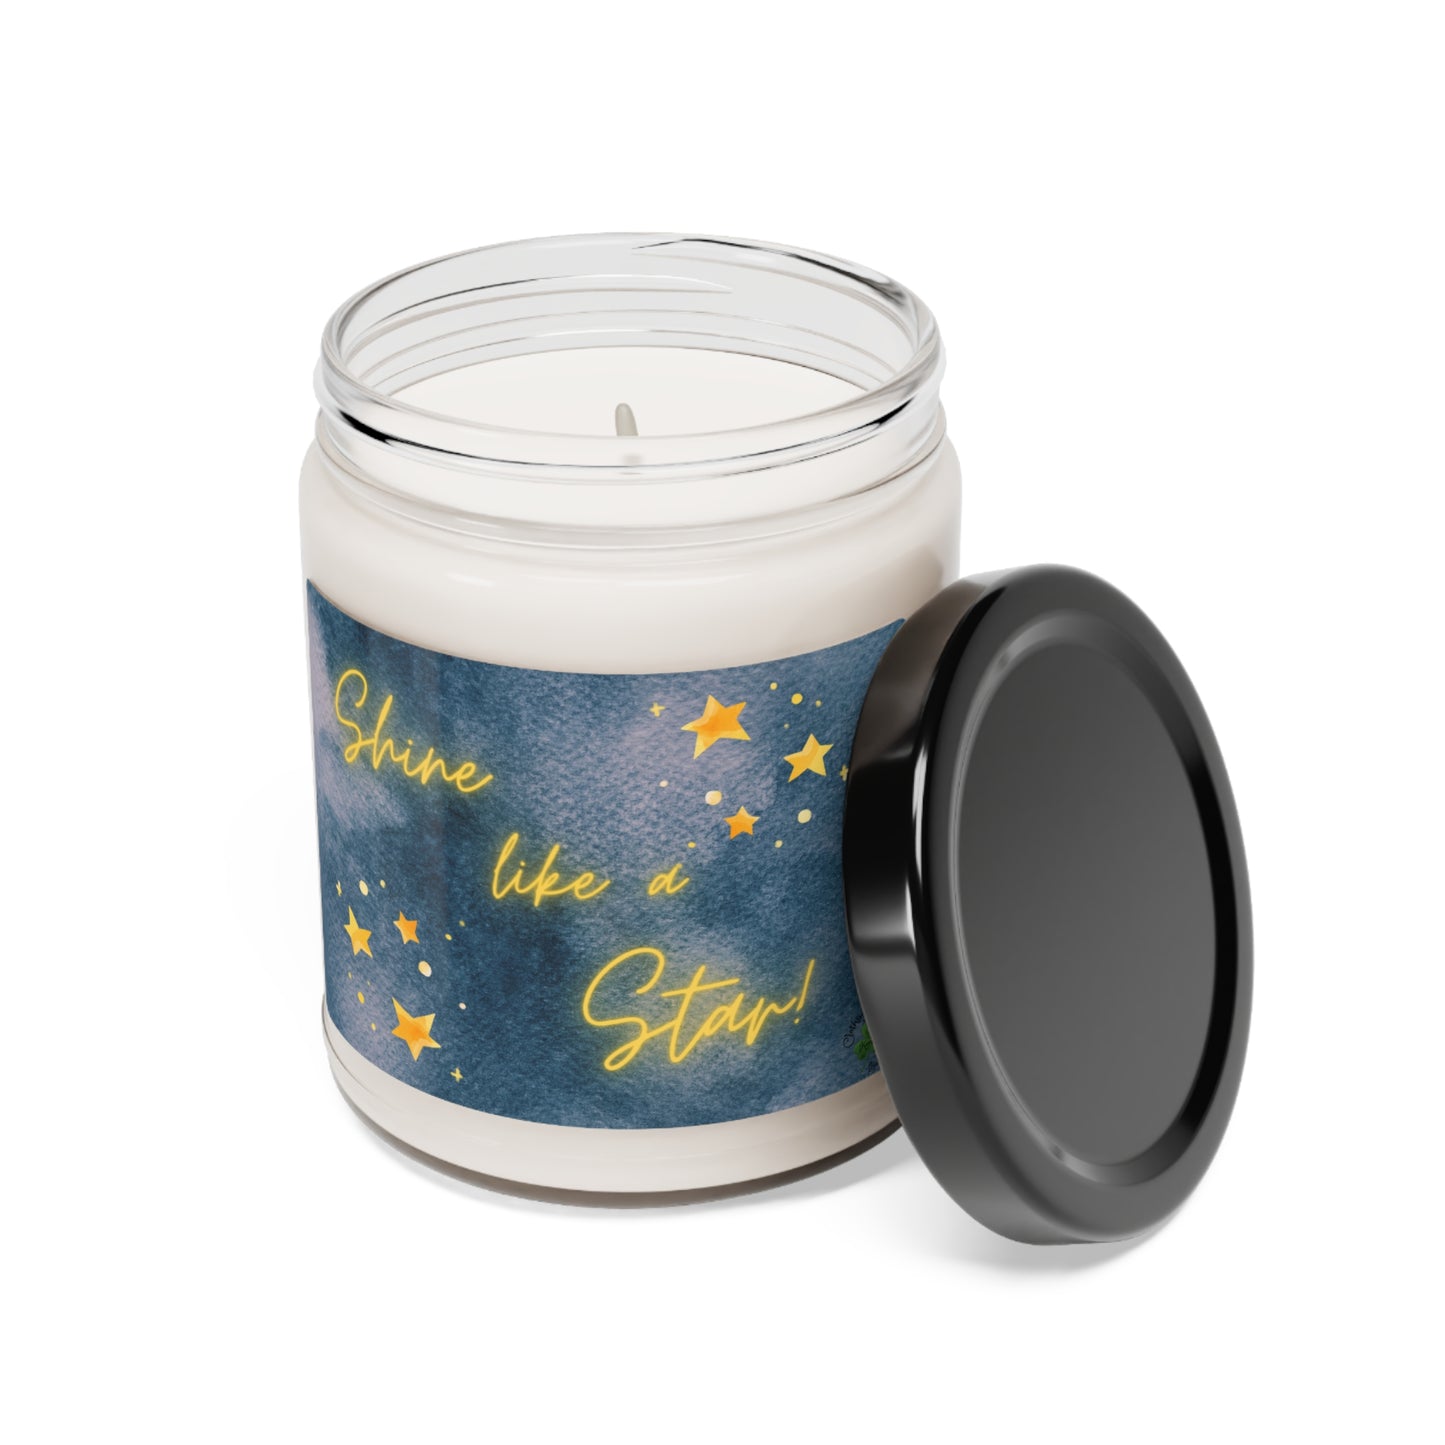 Shine Like a Star Scented Soy Candle, 9oz